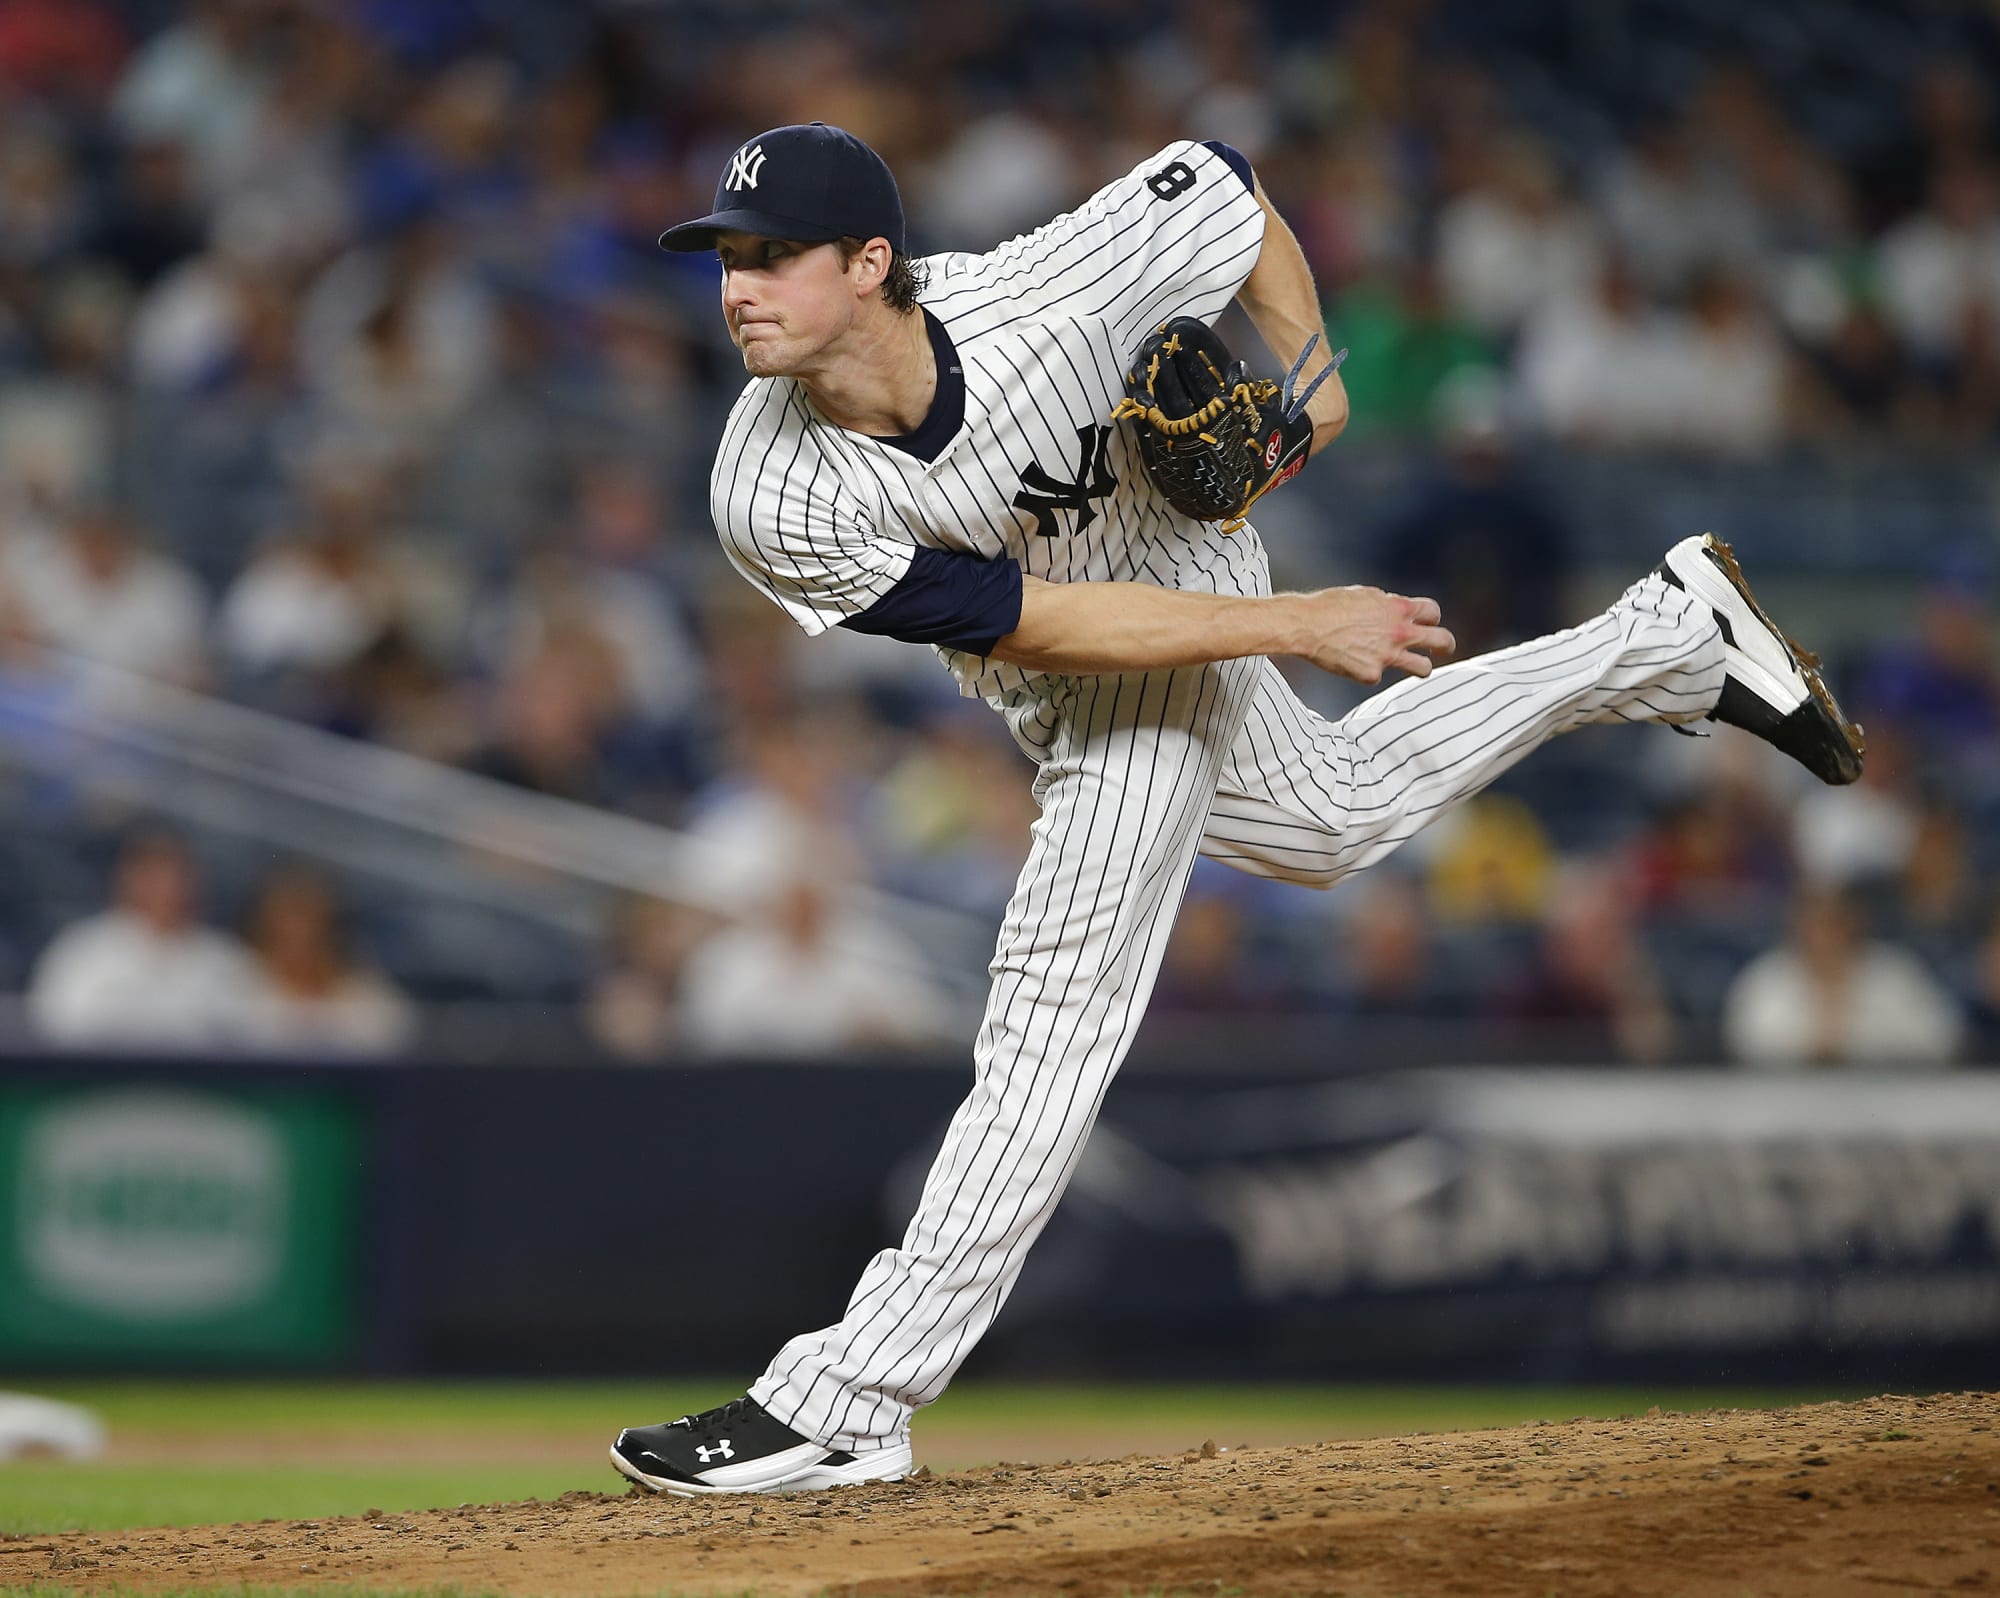 Yankees send Bryan Mitchell back to minors, day after double duty